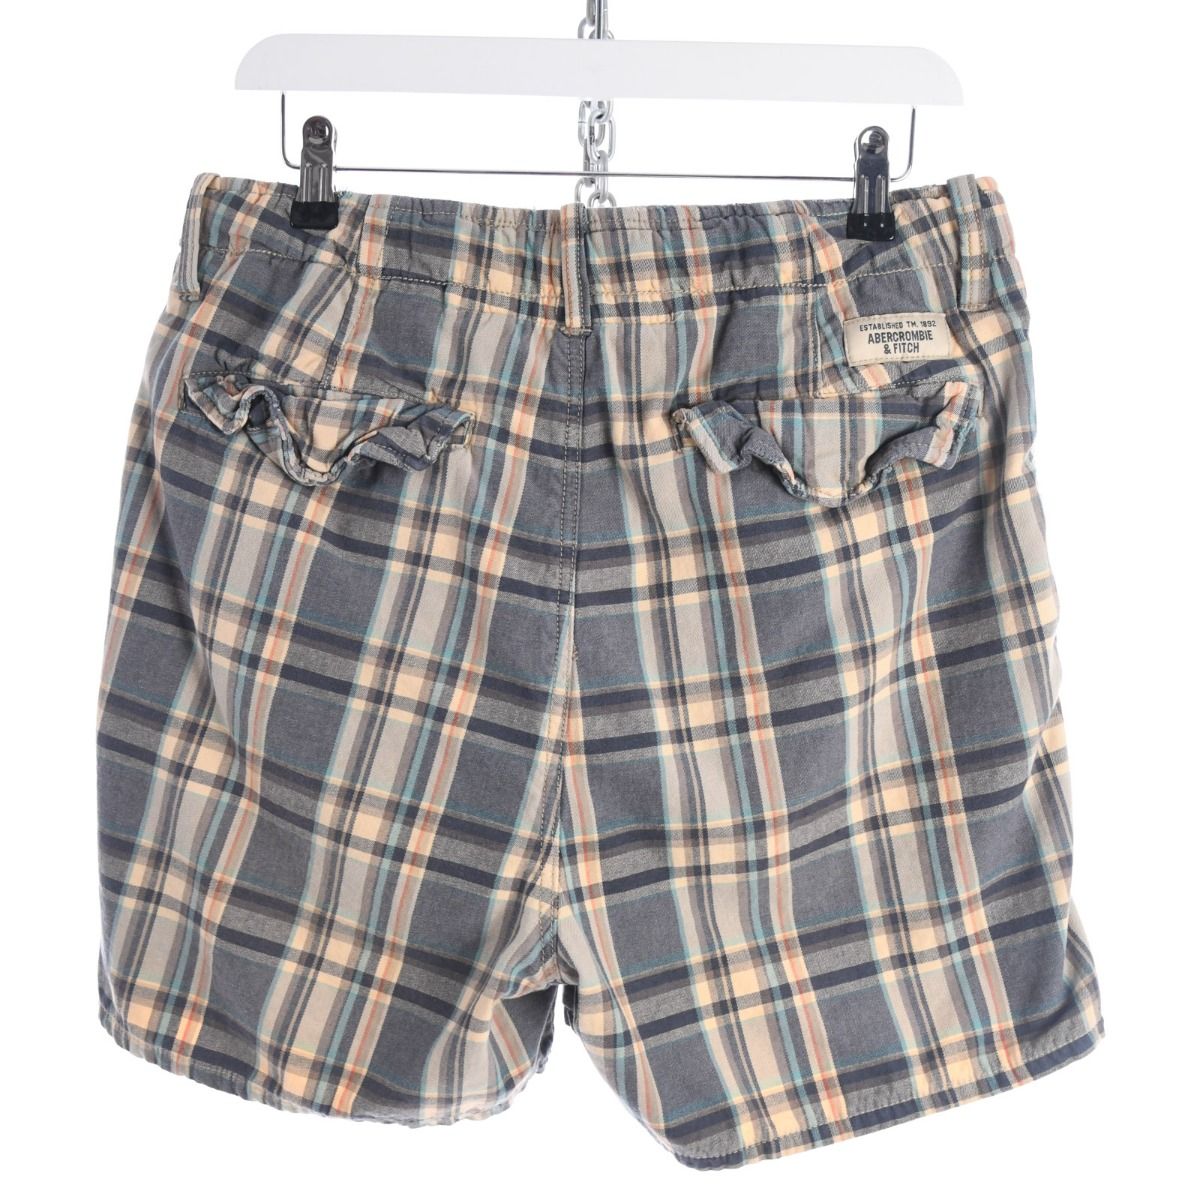 Abercrombie & Fitch Checkered Shorts